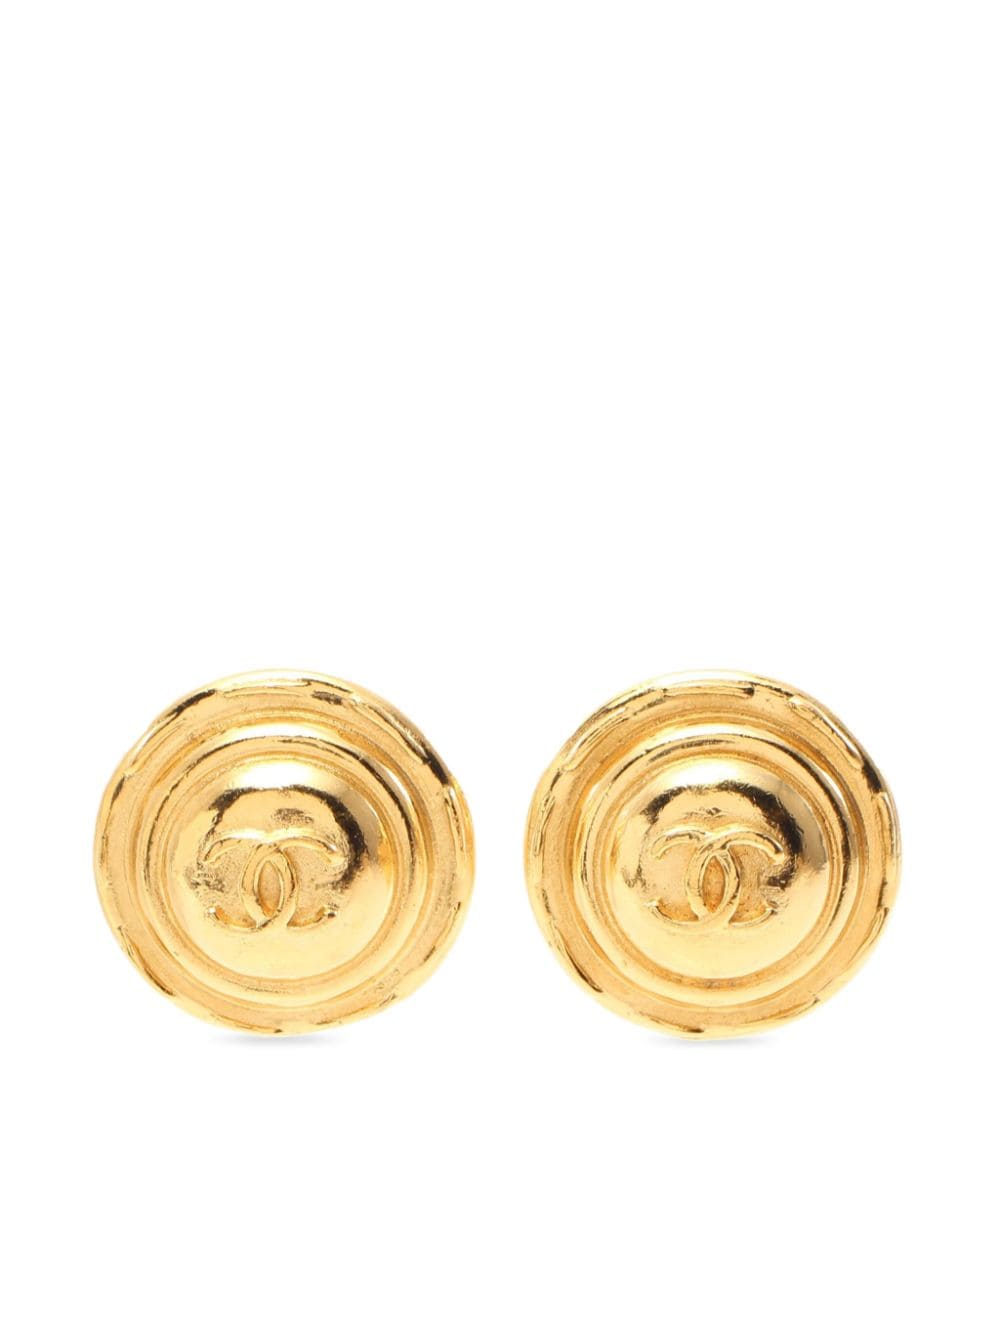 Pre-owned Chanel 1986-1988 Cc Button Clip-on Earrings In Gold